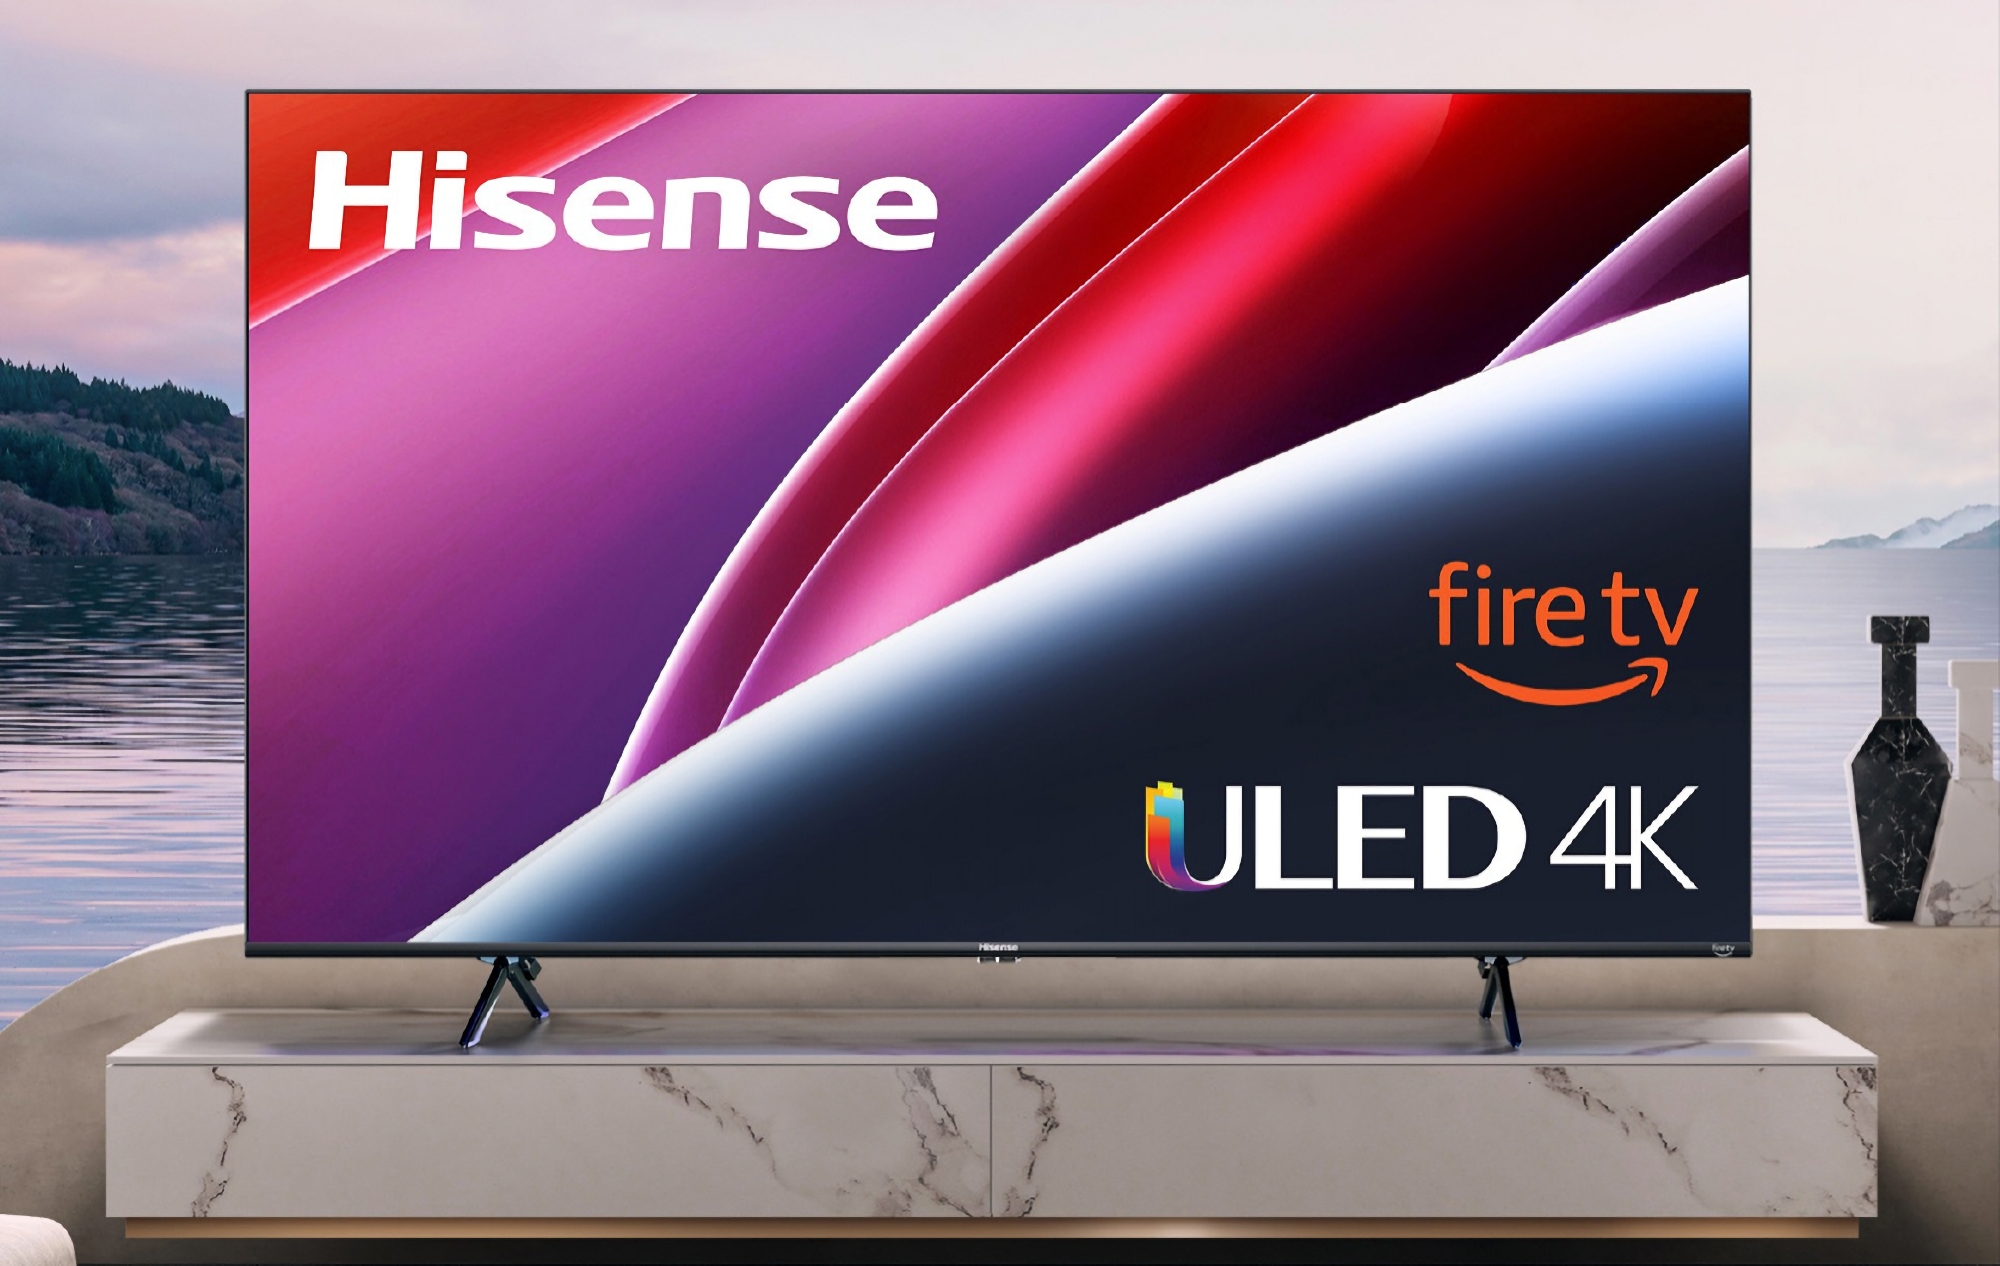 The 58-inch Hisense ULED U6 smart TV with Fire TV on board is available with a $150 discount on Amazon